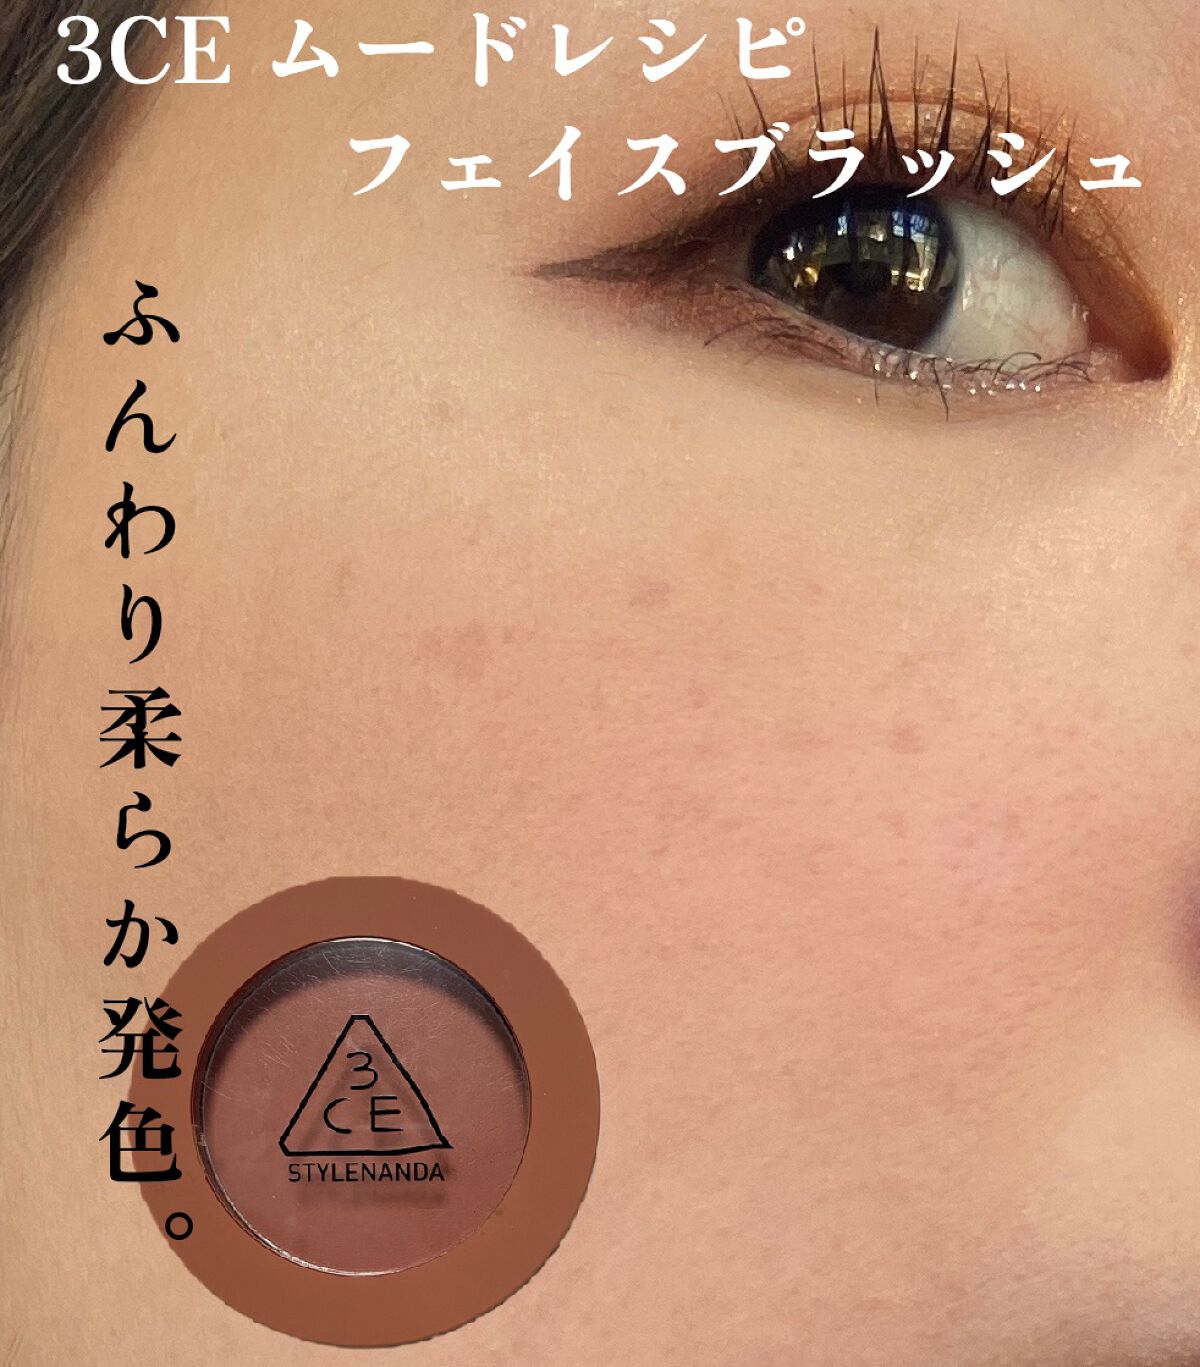 3CE MOOD RECIPE FACE BLUSH /3CE/パウダーチーク by Aoi☻